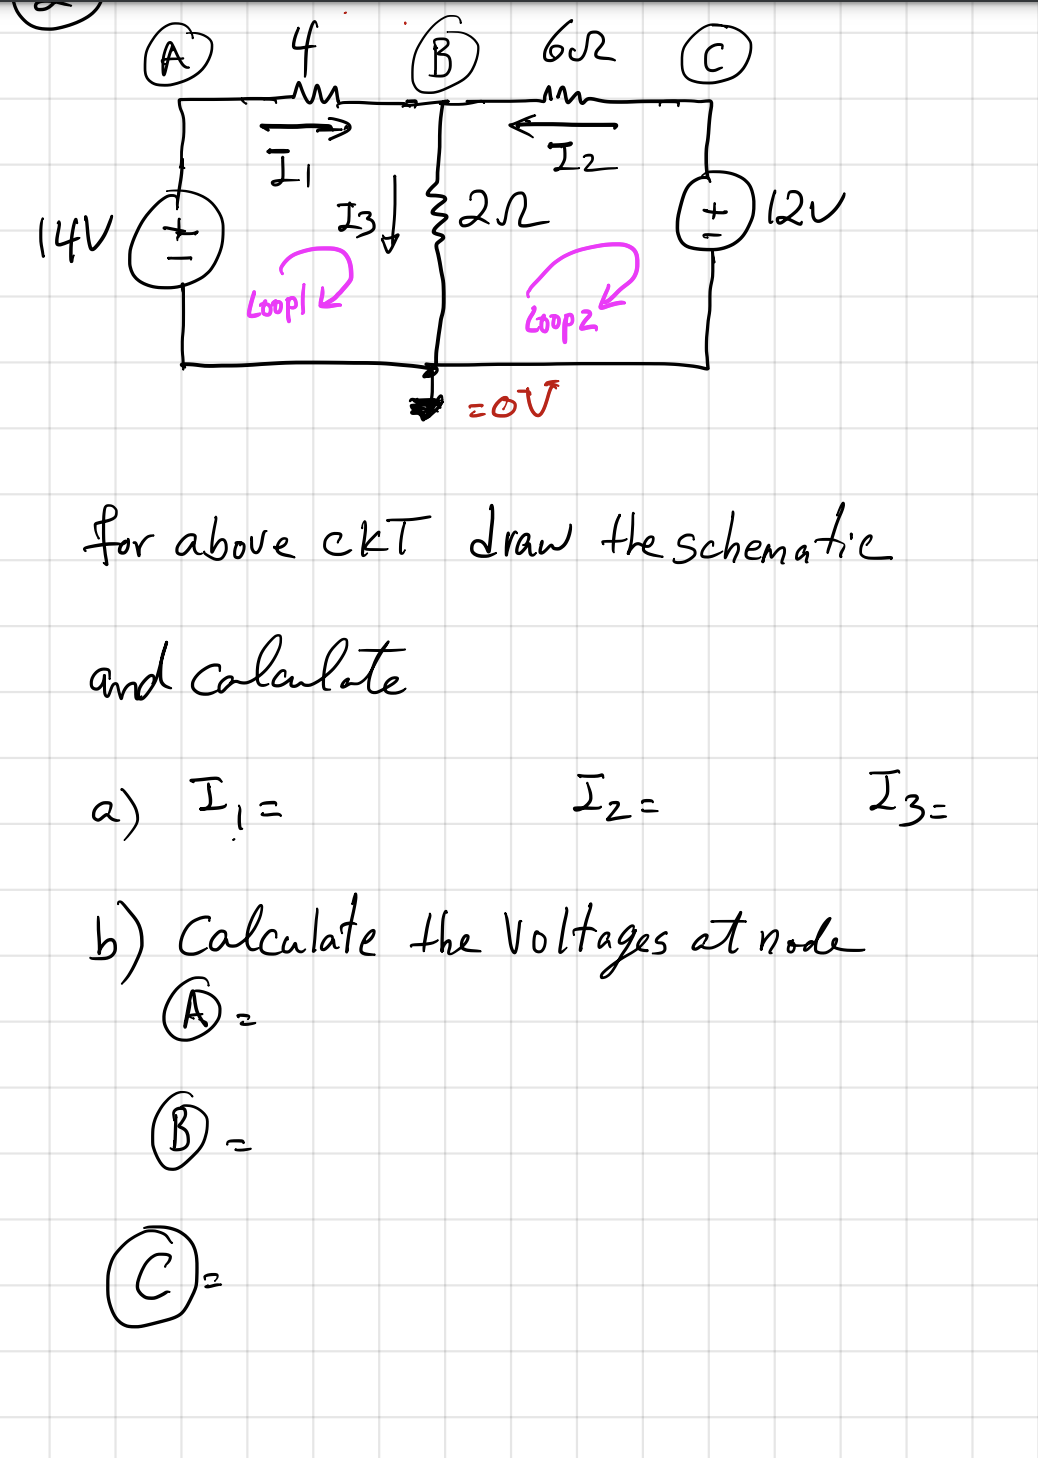 (B)
Ⓒ
A
C
I,
+120
14V / +
Loop!
=OV
for above ckt draw the schematic
and calculate
a) I₁ =
I₂ =
I3 =
b) Calculate the voltages at node
(A) =
cl
4
m
2
62
IM
B
133222
1₂
Zoop 2
M